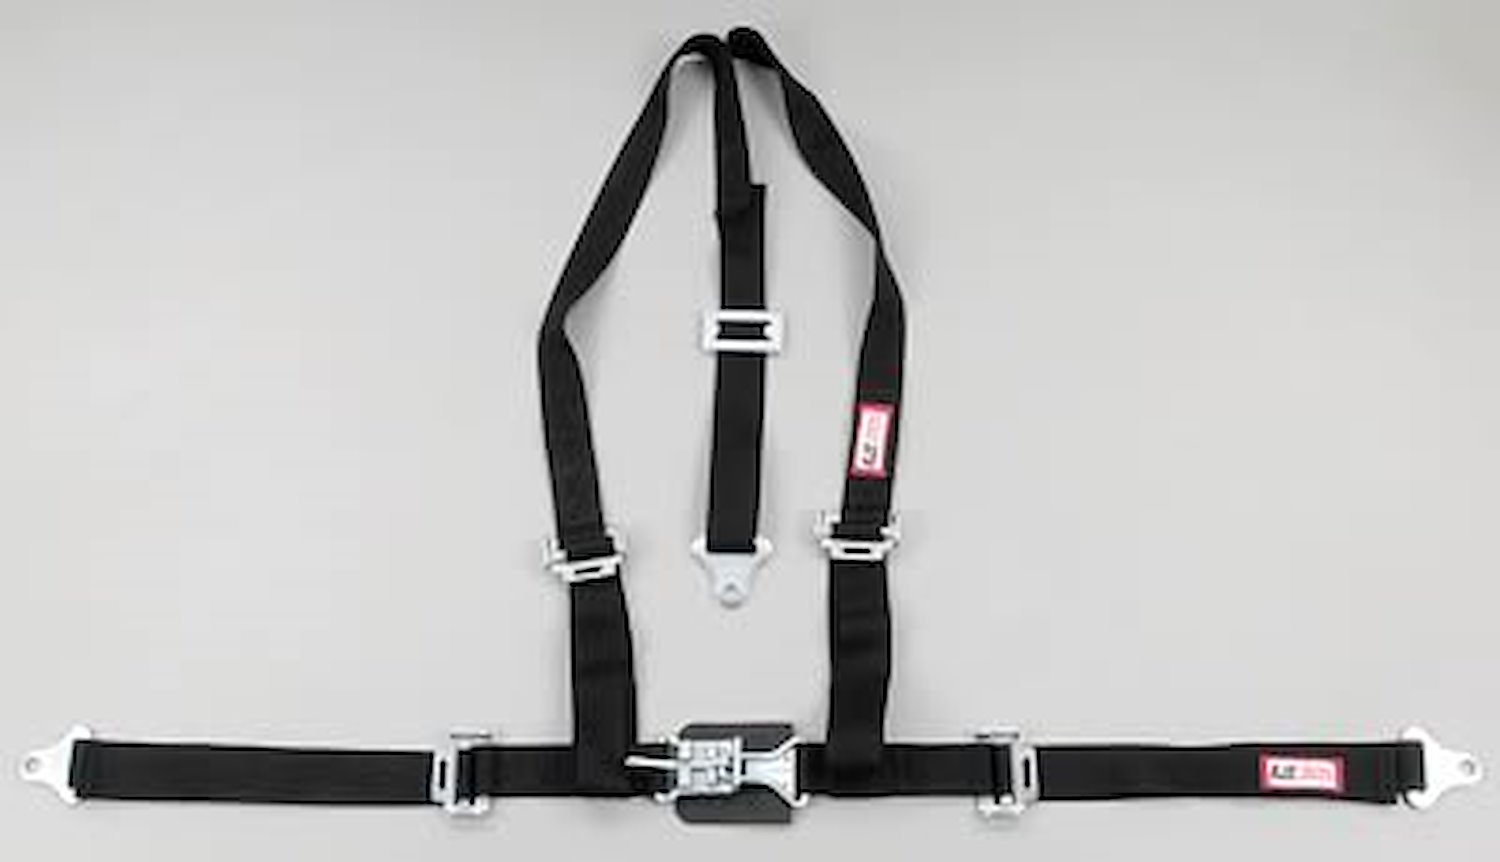 NON-SFI L&L HARNESS 3 PULL DOWN Lap Belt SEWN IN 2 Shoulder Harness V ROLL BAR Mount ALL SNAP ENDS BLUE